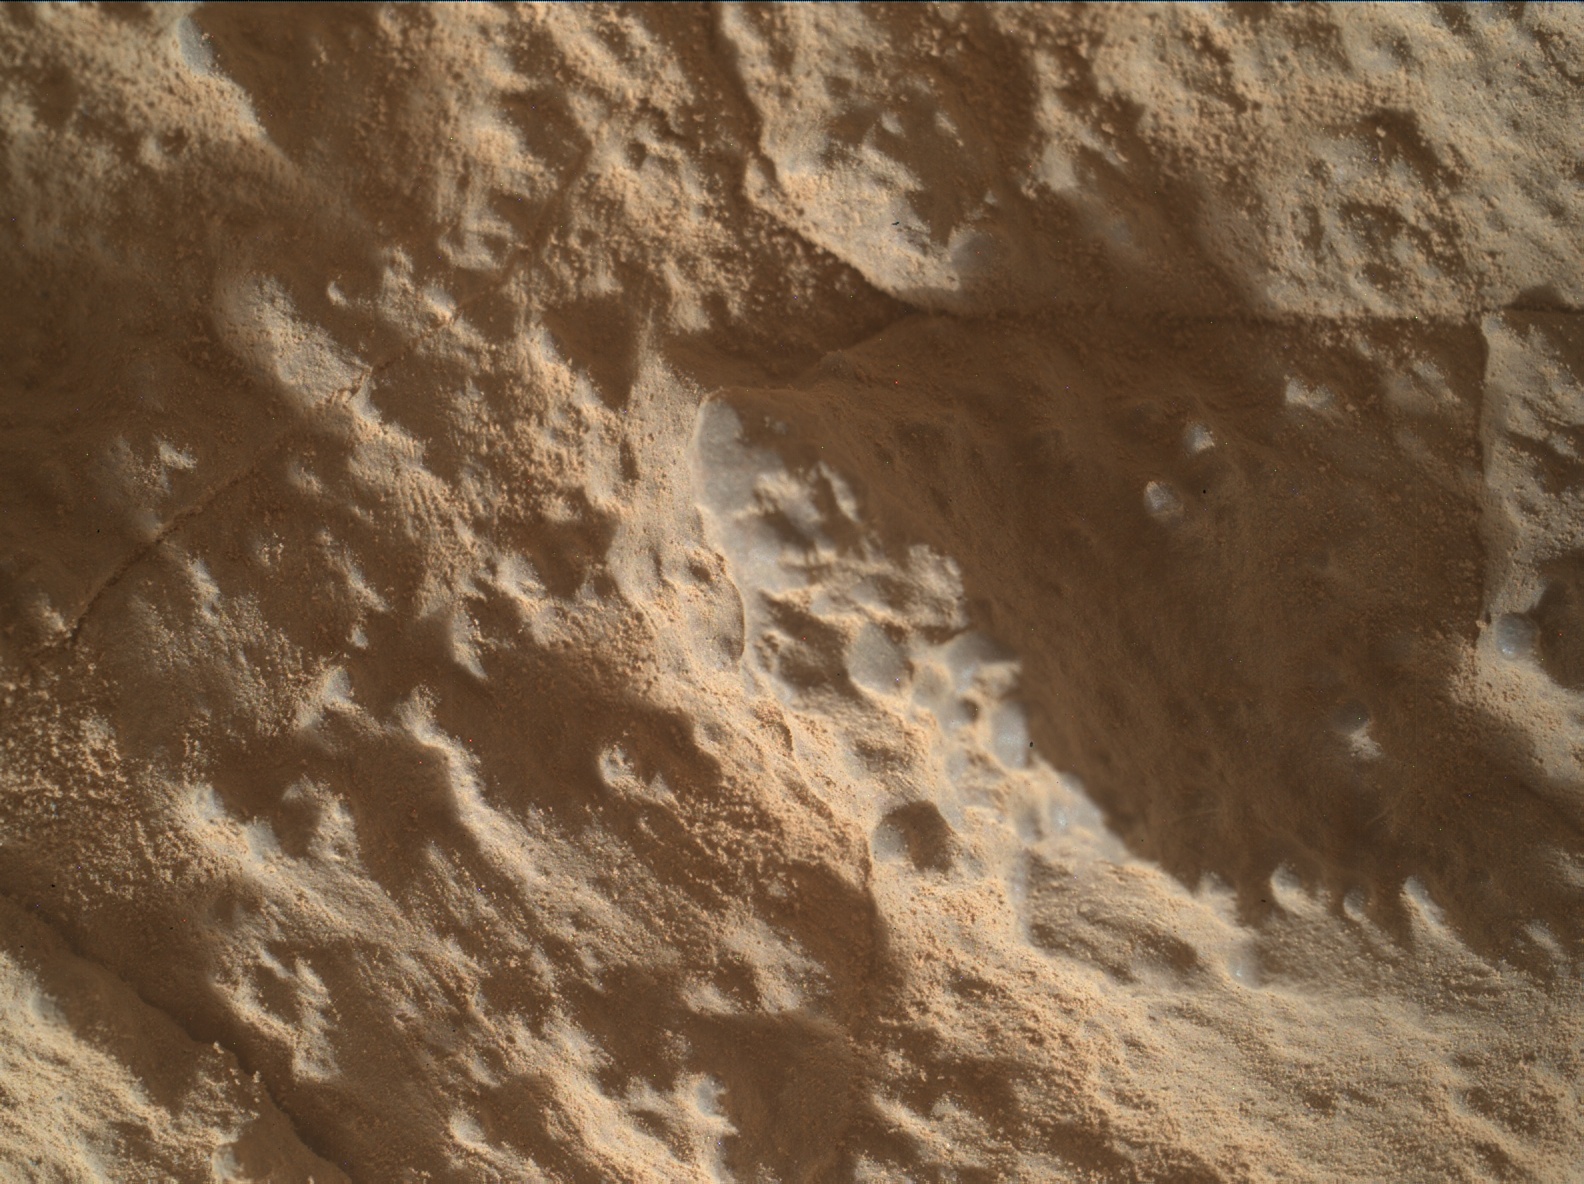 Nasa's Mars rover Curiosity acquired this image using its Mars Hand Lens Imager (MAHLI) on Sol 3937